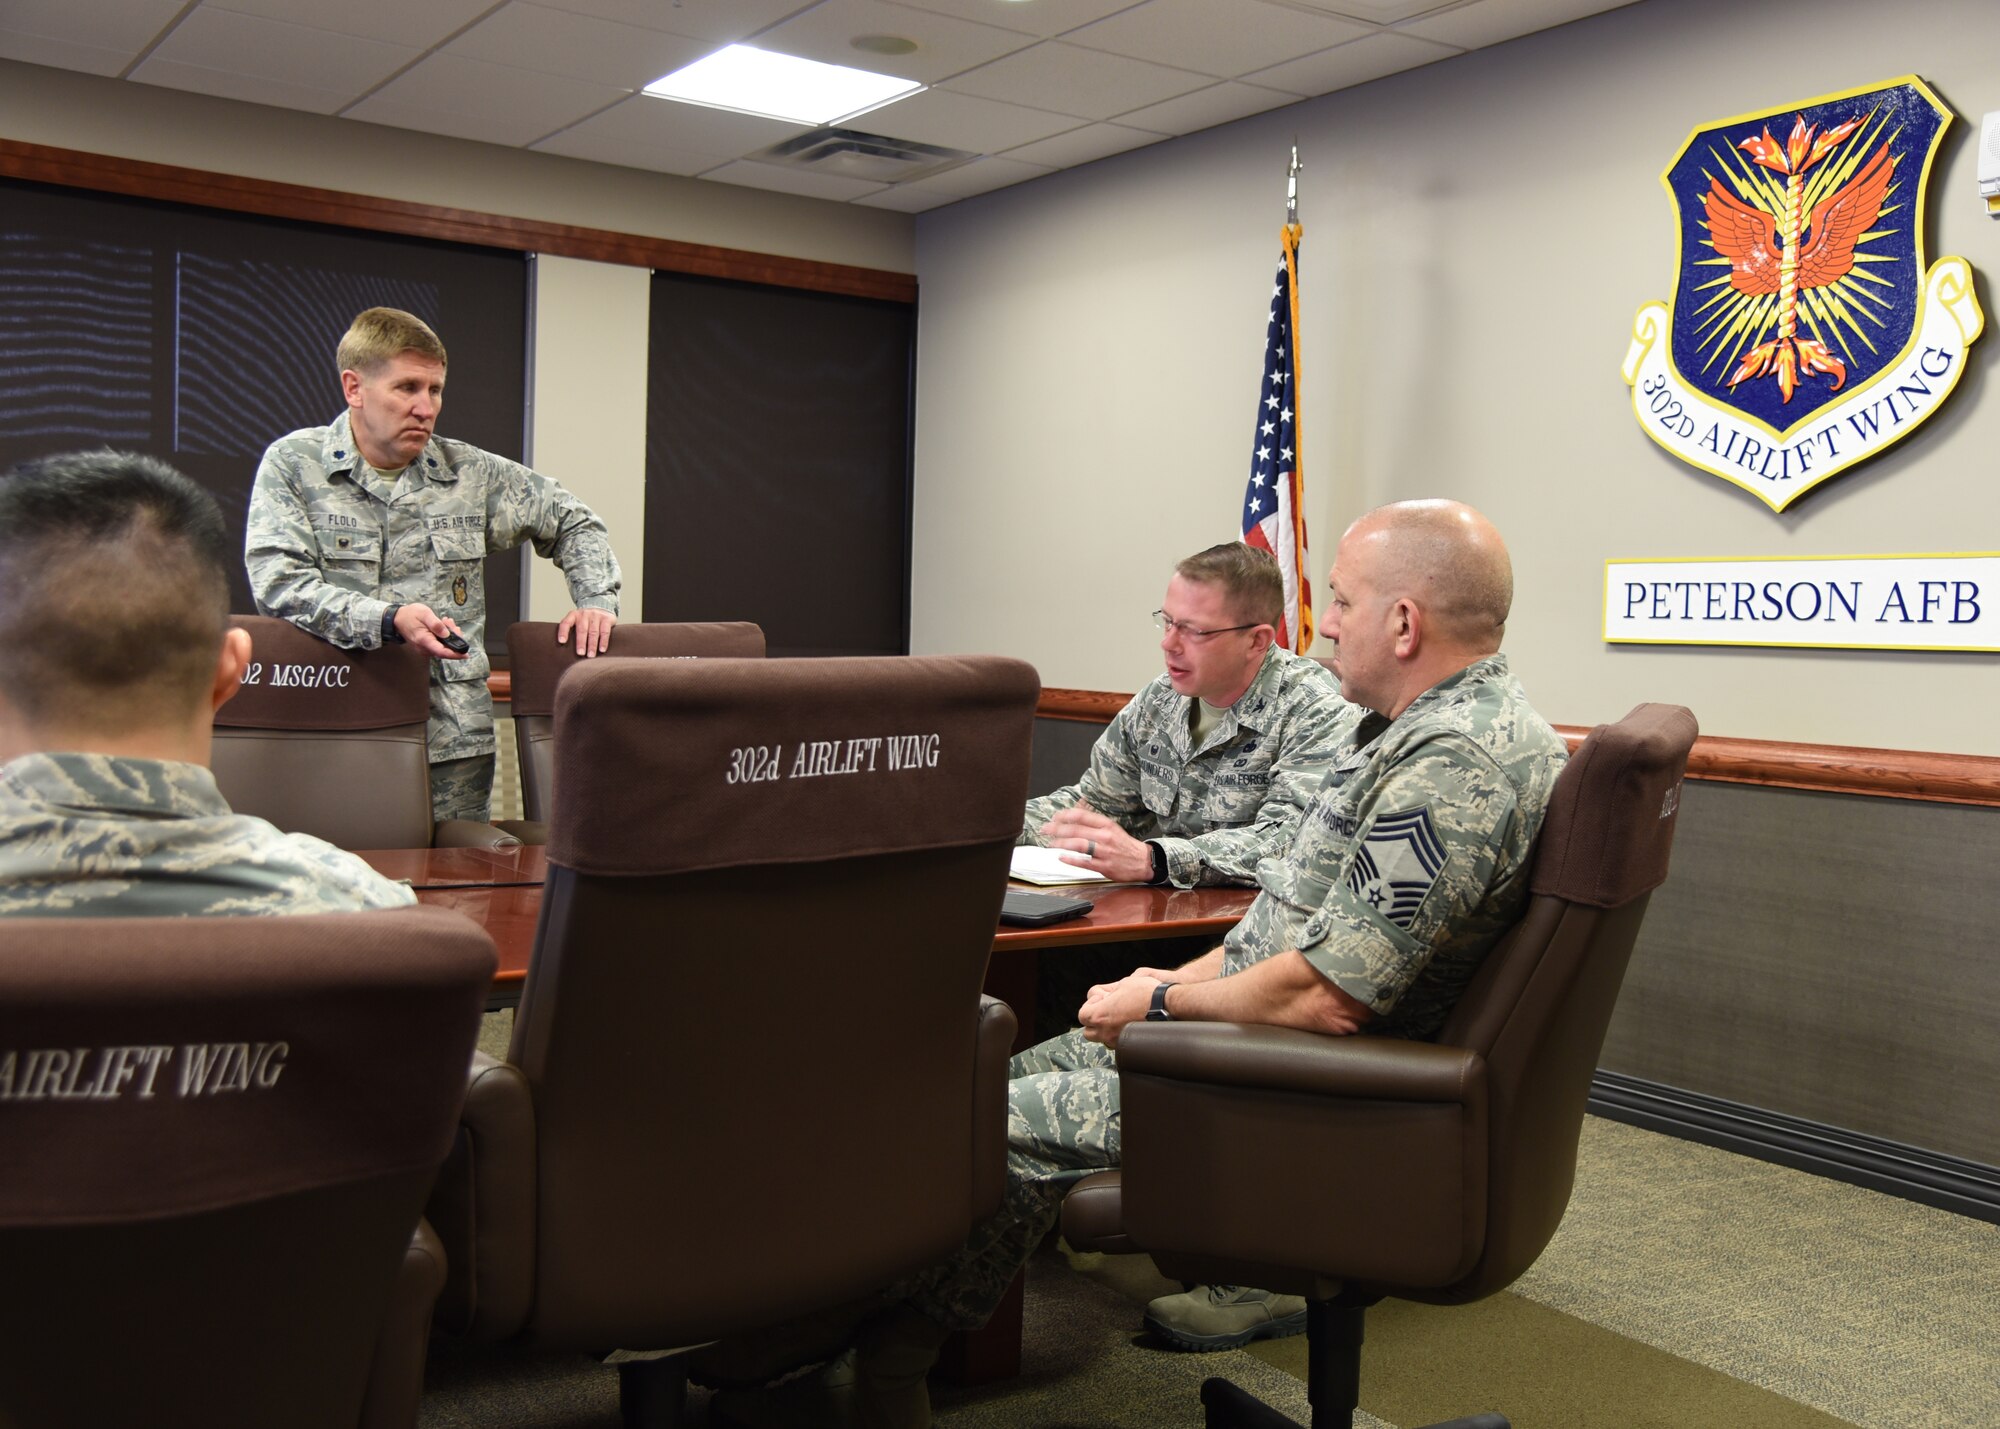 Lt. Col. Alan Flolo, 302nd Airlift Wing Inspector General Inspections, discusses the status of the Commanders Inspection Program during a meeting at Peterson Air Force Base, Colorado, April 24, 2018. The 403rd Wing Inspector General Inspections Division and 403rd Wing Process Manager visited their counterparts at Peterson Air Force Base, Colorado, to learn more about how the two offices can work together to be more efficient and improve the unit. (U.S. Air Force photo/Maj. Marnee A.C. Losurdo)